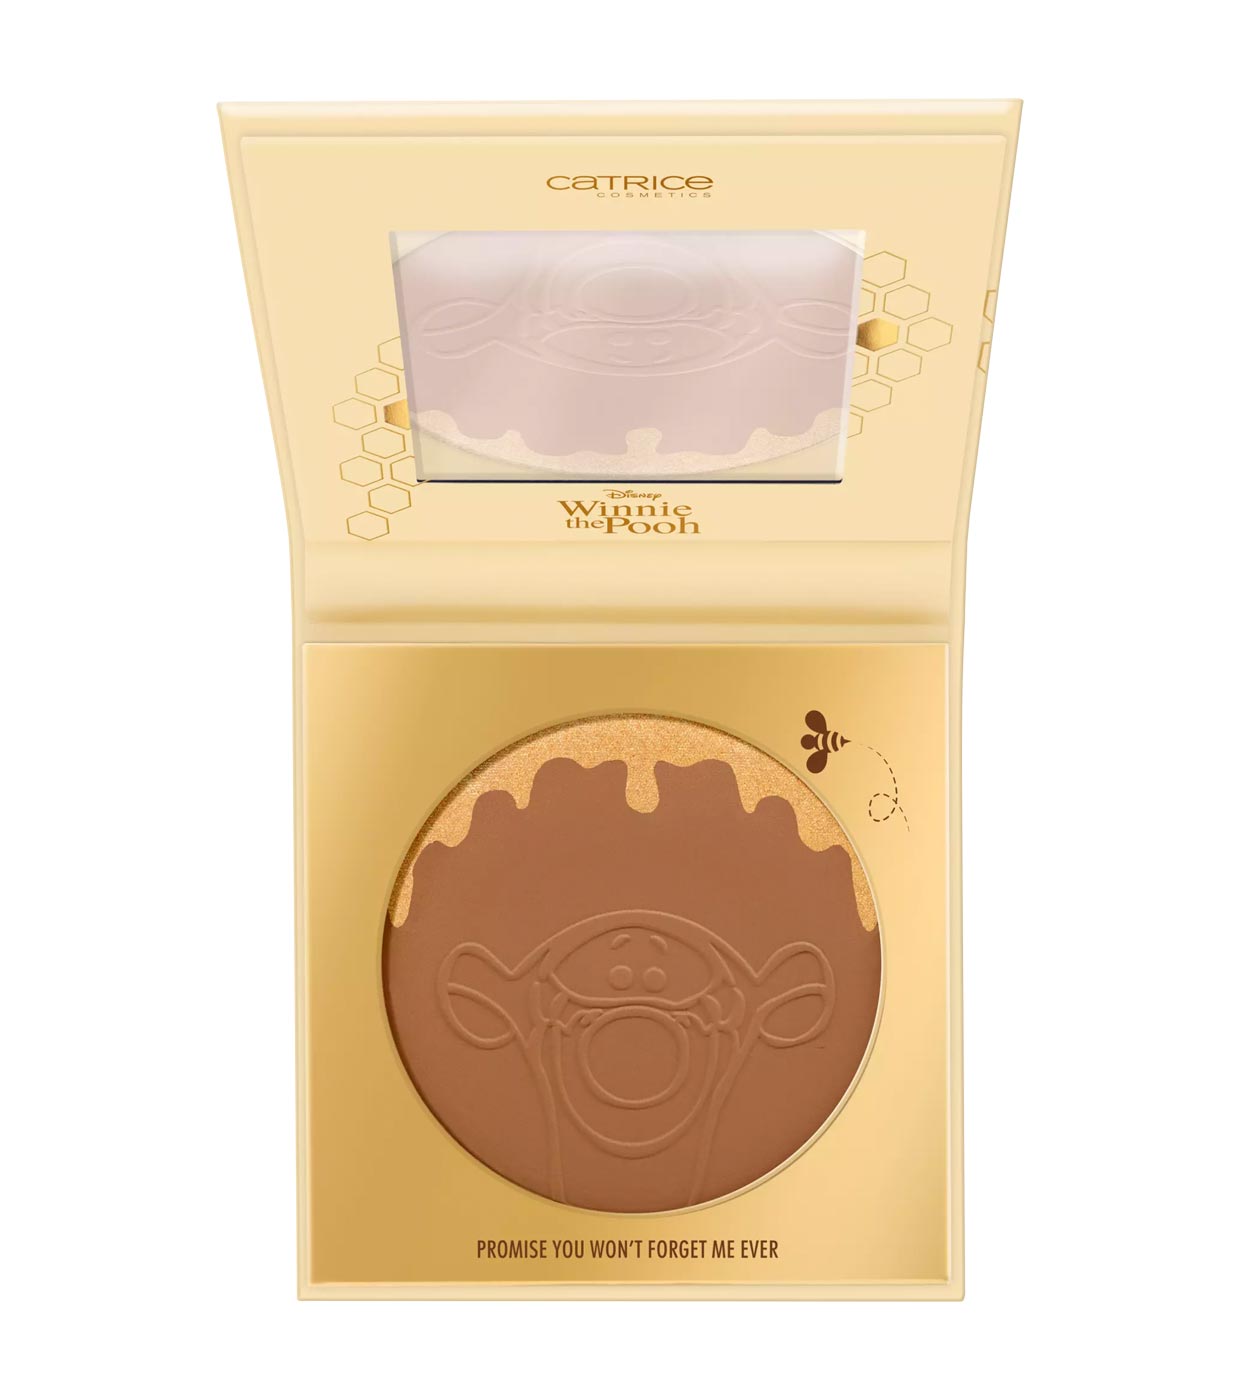 Buy Catrice - *Winnie the Pooh* - Subtle Shimmer Powder Bronzer - 020:  Promise You Won't Forget Me Ever | Maquillalia